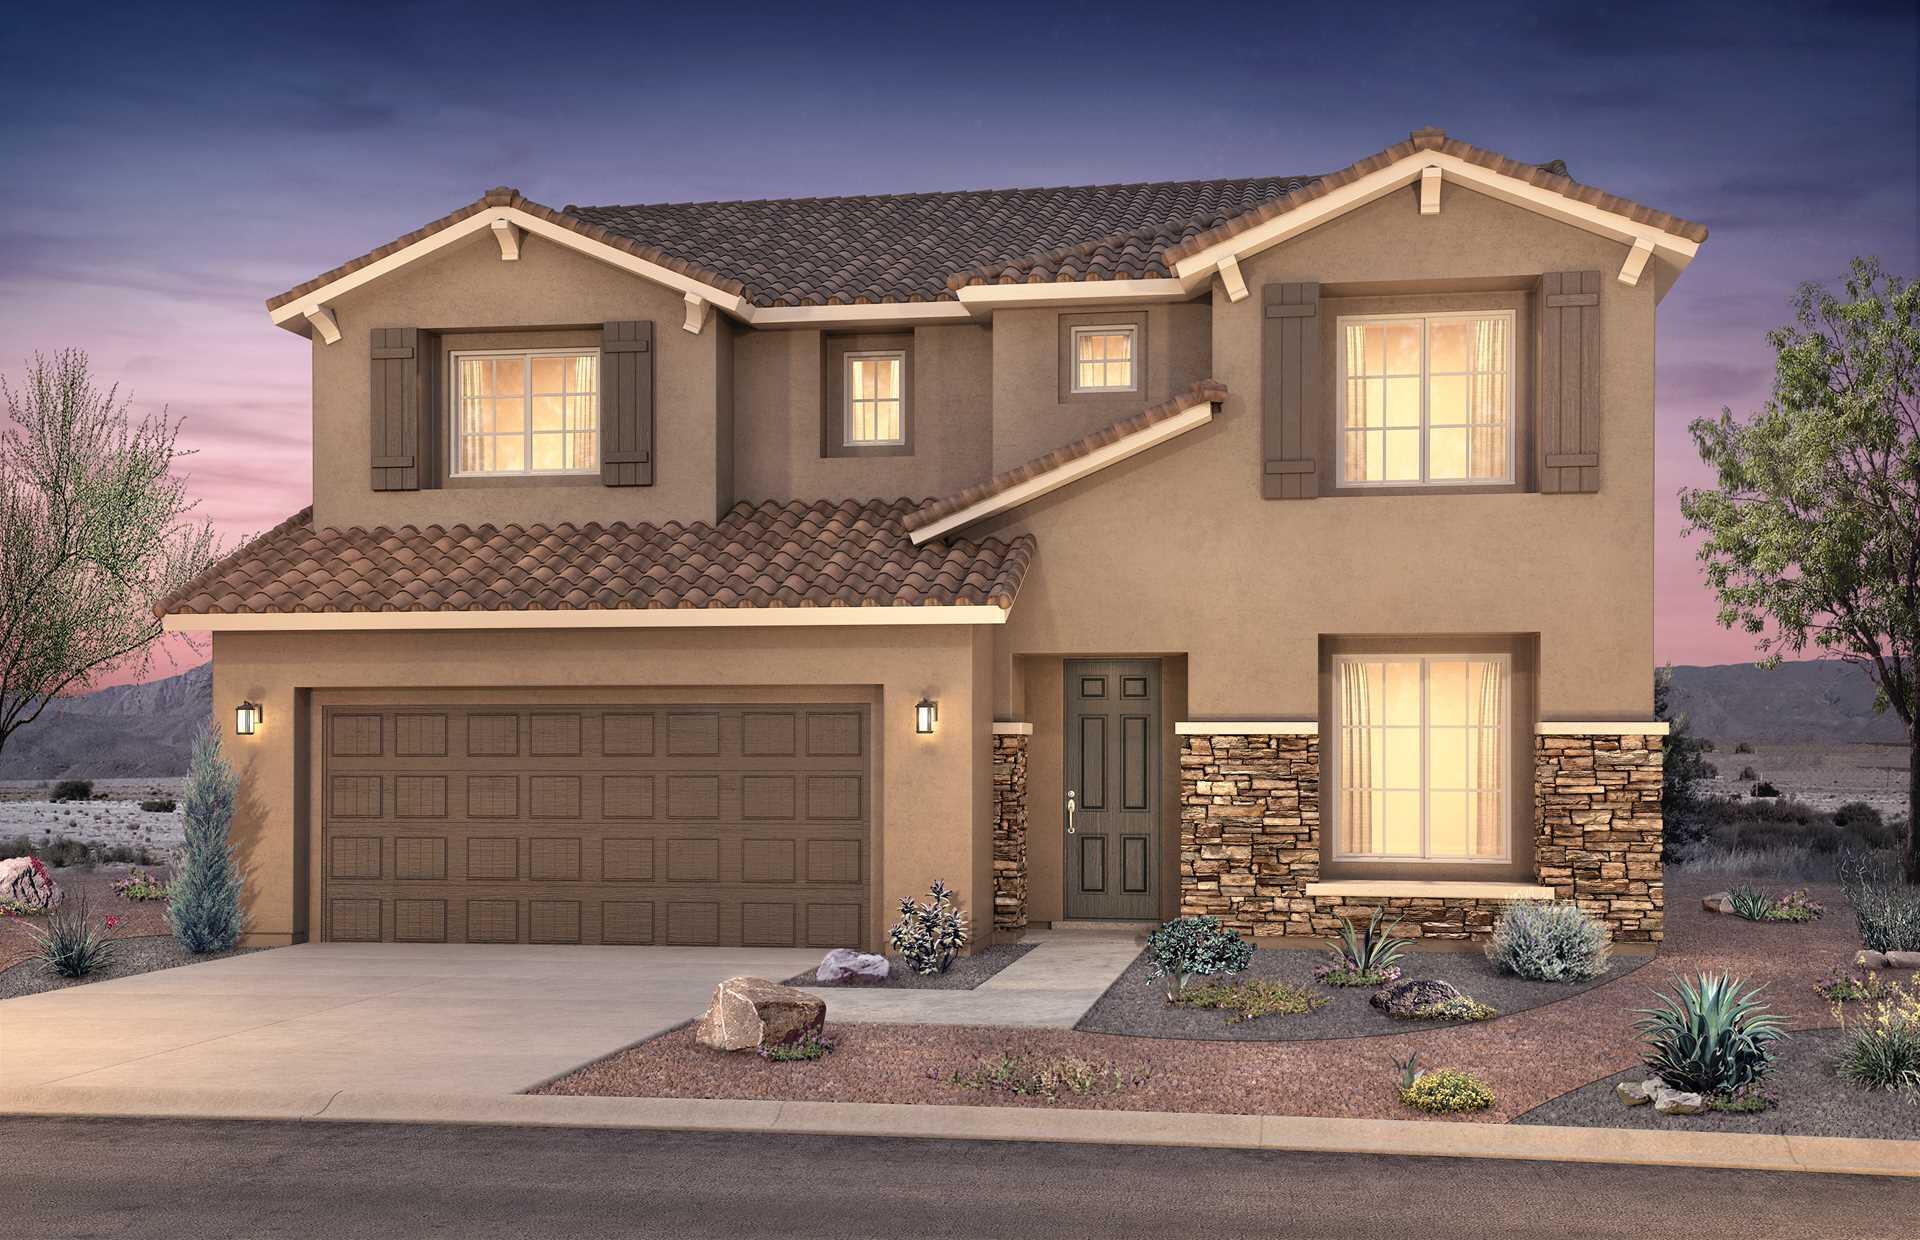 Gorgeous, brand-new Manzanita plan by Pulte in our gated Mariposa community! French doors at the den make this the perfect space to relax and read or work from home! Luxurious Chef Kitchen w/cooktop, wall ovens, and spacious quartz counters and island. Lots of high-grade cabinets and a tile backsplash. Upgraded Owner's Bath with huge, tiled walk-in shower. The private amenity Center right next door has 2 pools, a gym, yoga, and a huge park! Must see today!